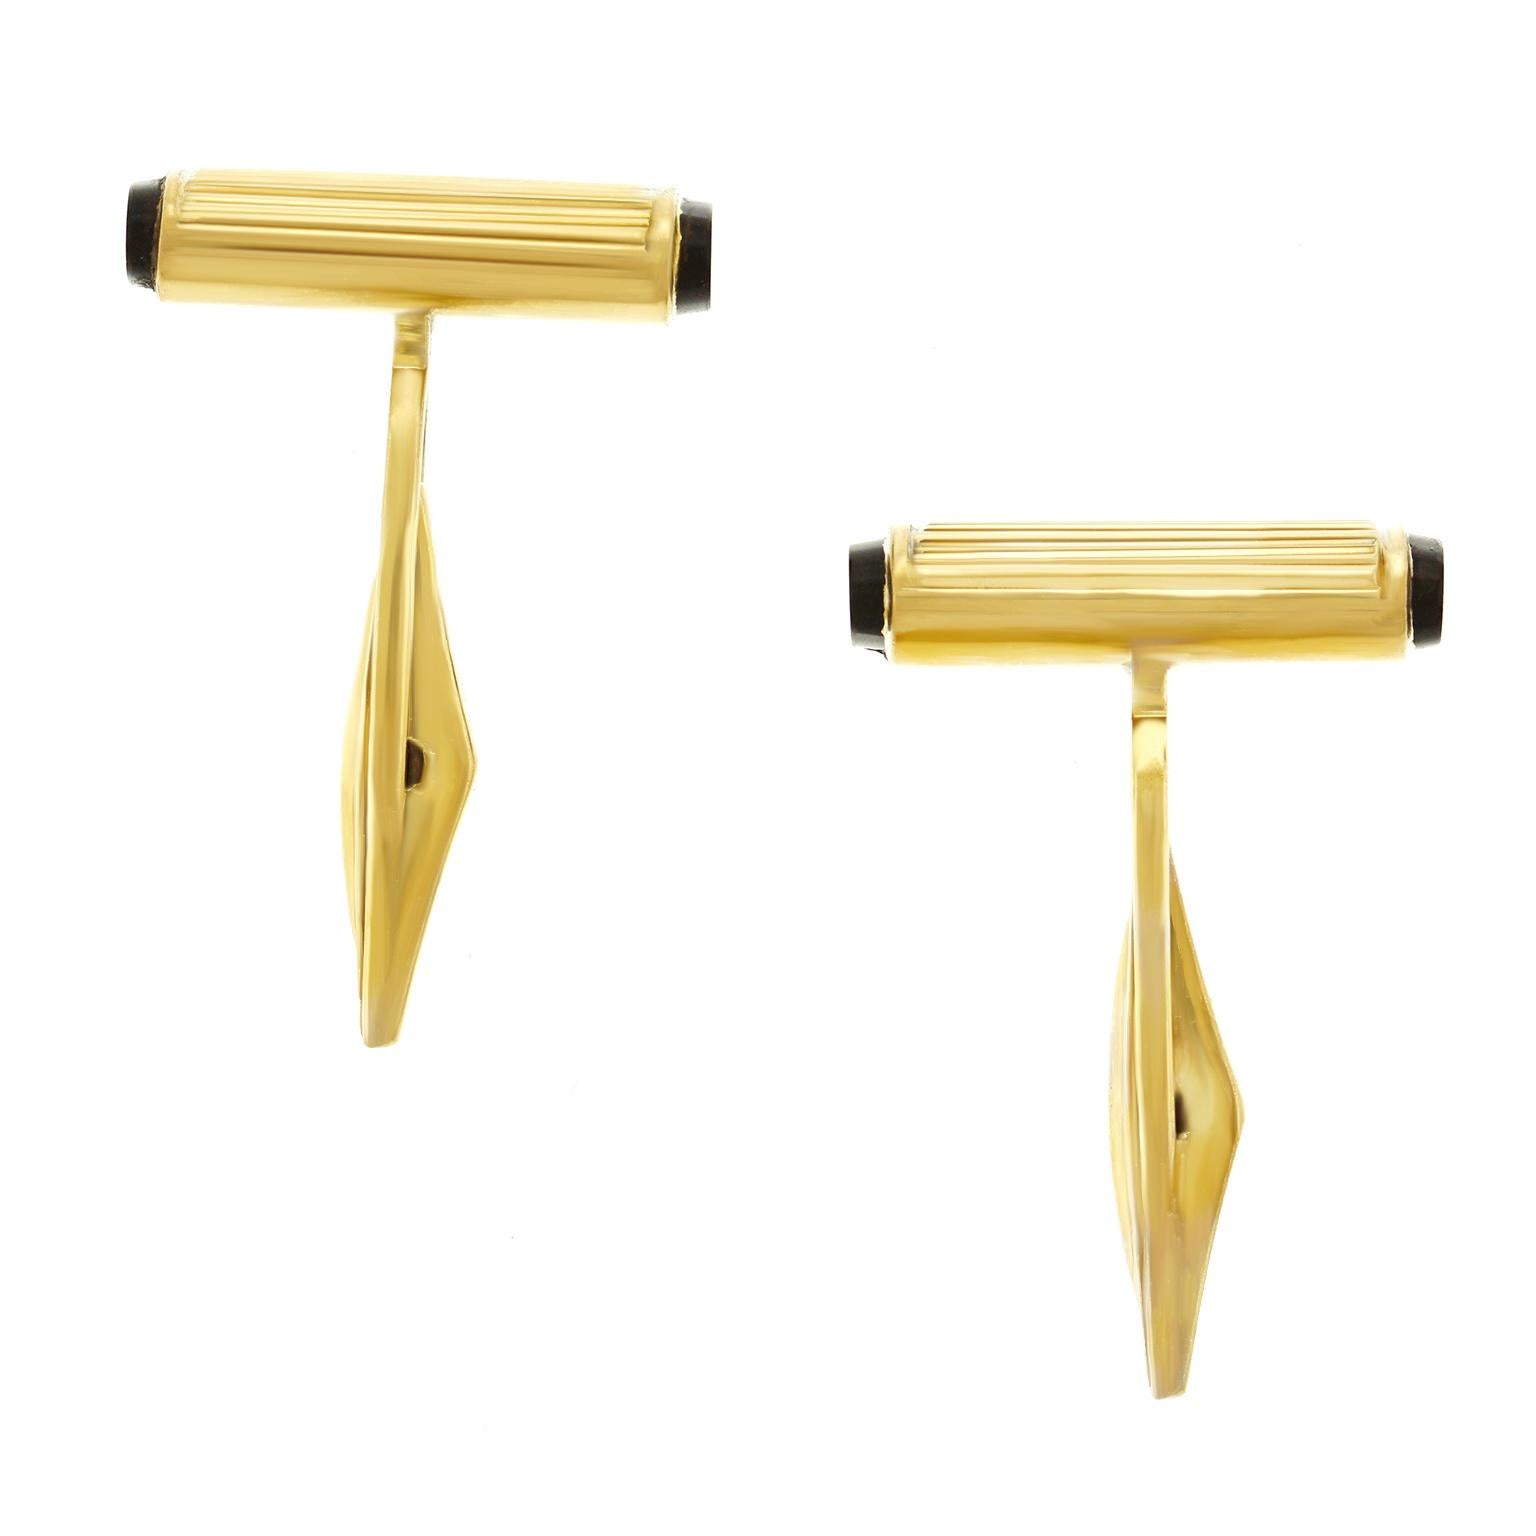 Circa 1950s, 14k, Germany. These modernist fifties cufflinks have that Deco all grown up vibe. Mix in some German industrial design and the look is understated sophistication. Finely fashioned, they are in excellent condition. 

Remark: “These